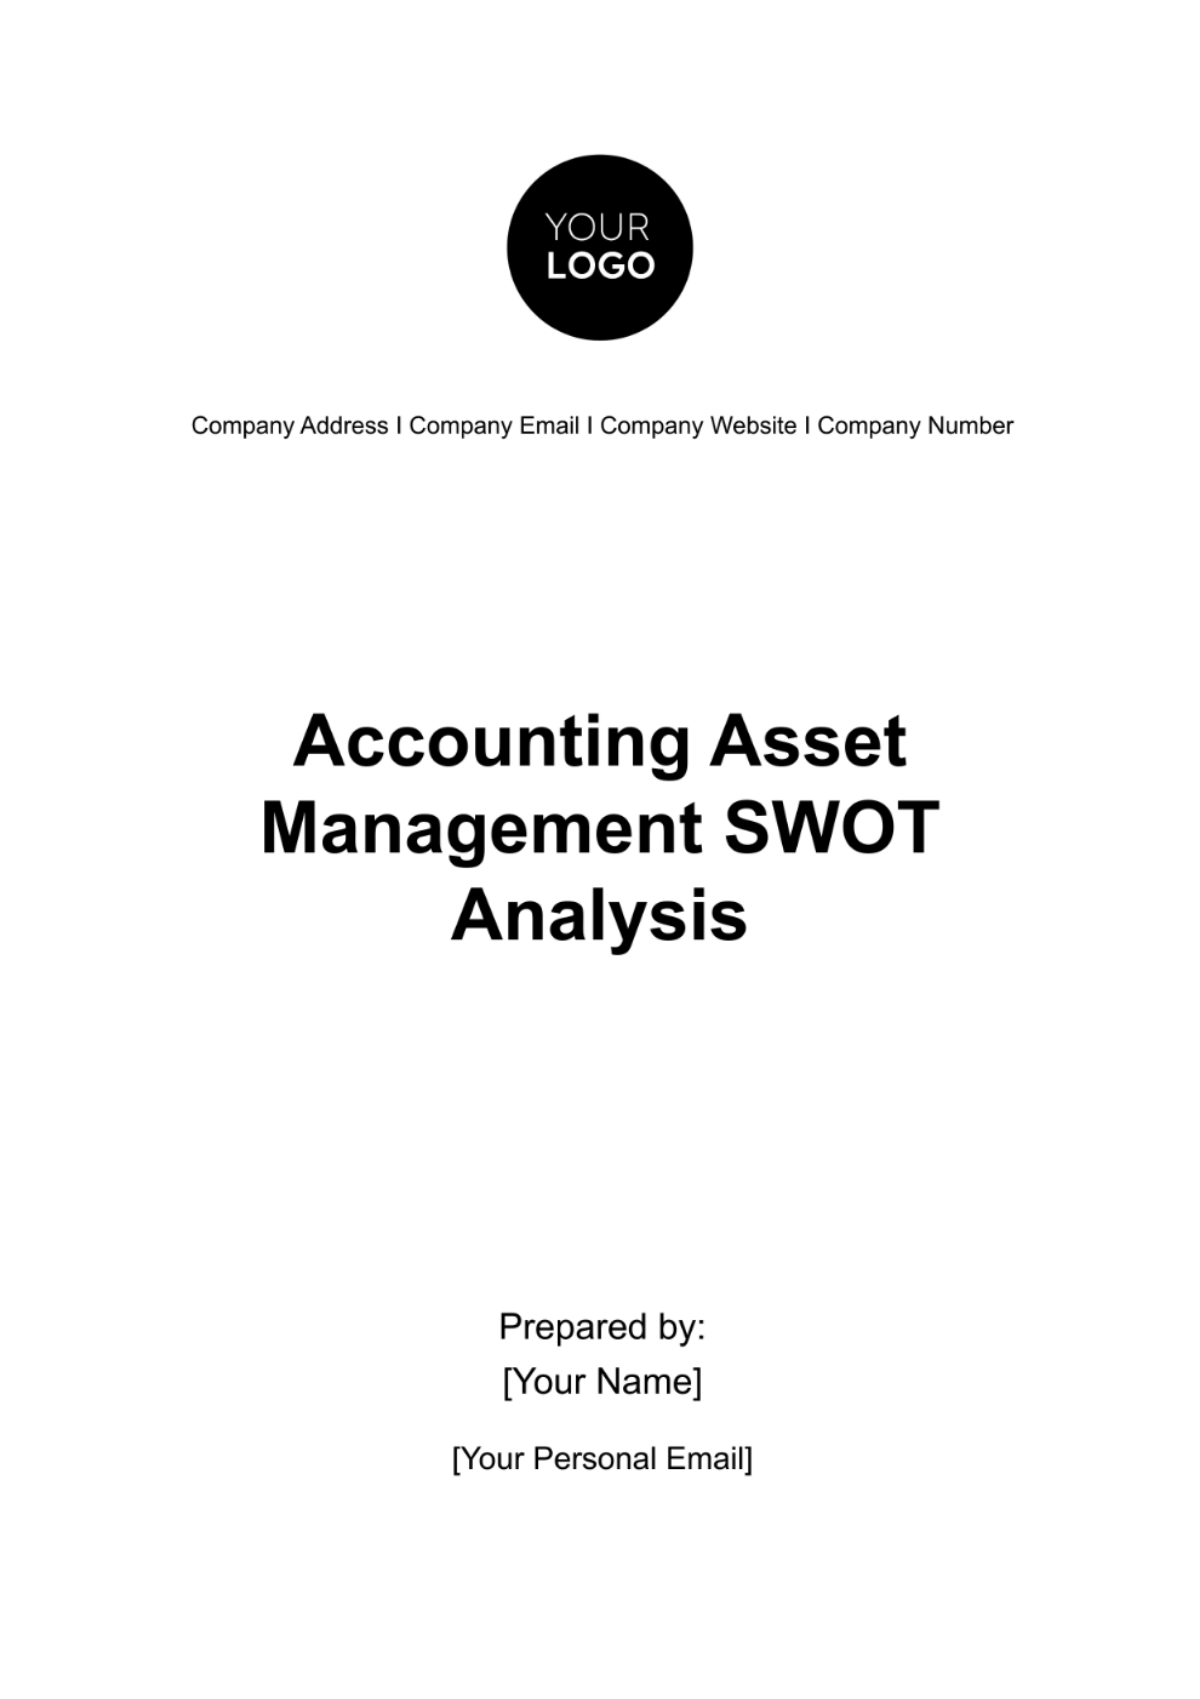 Accounting Asset Management SWOT Analysis Template